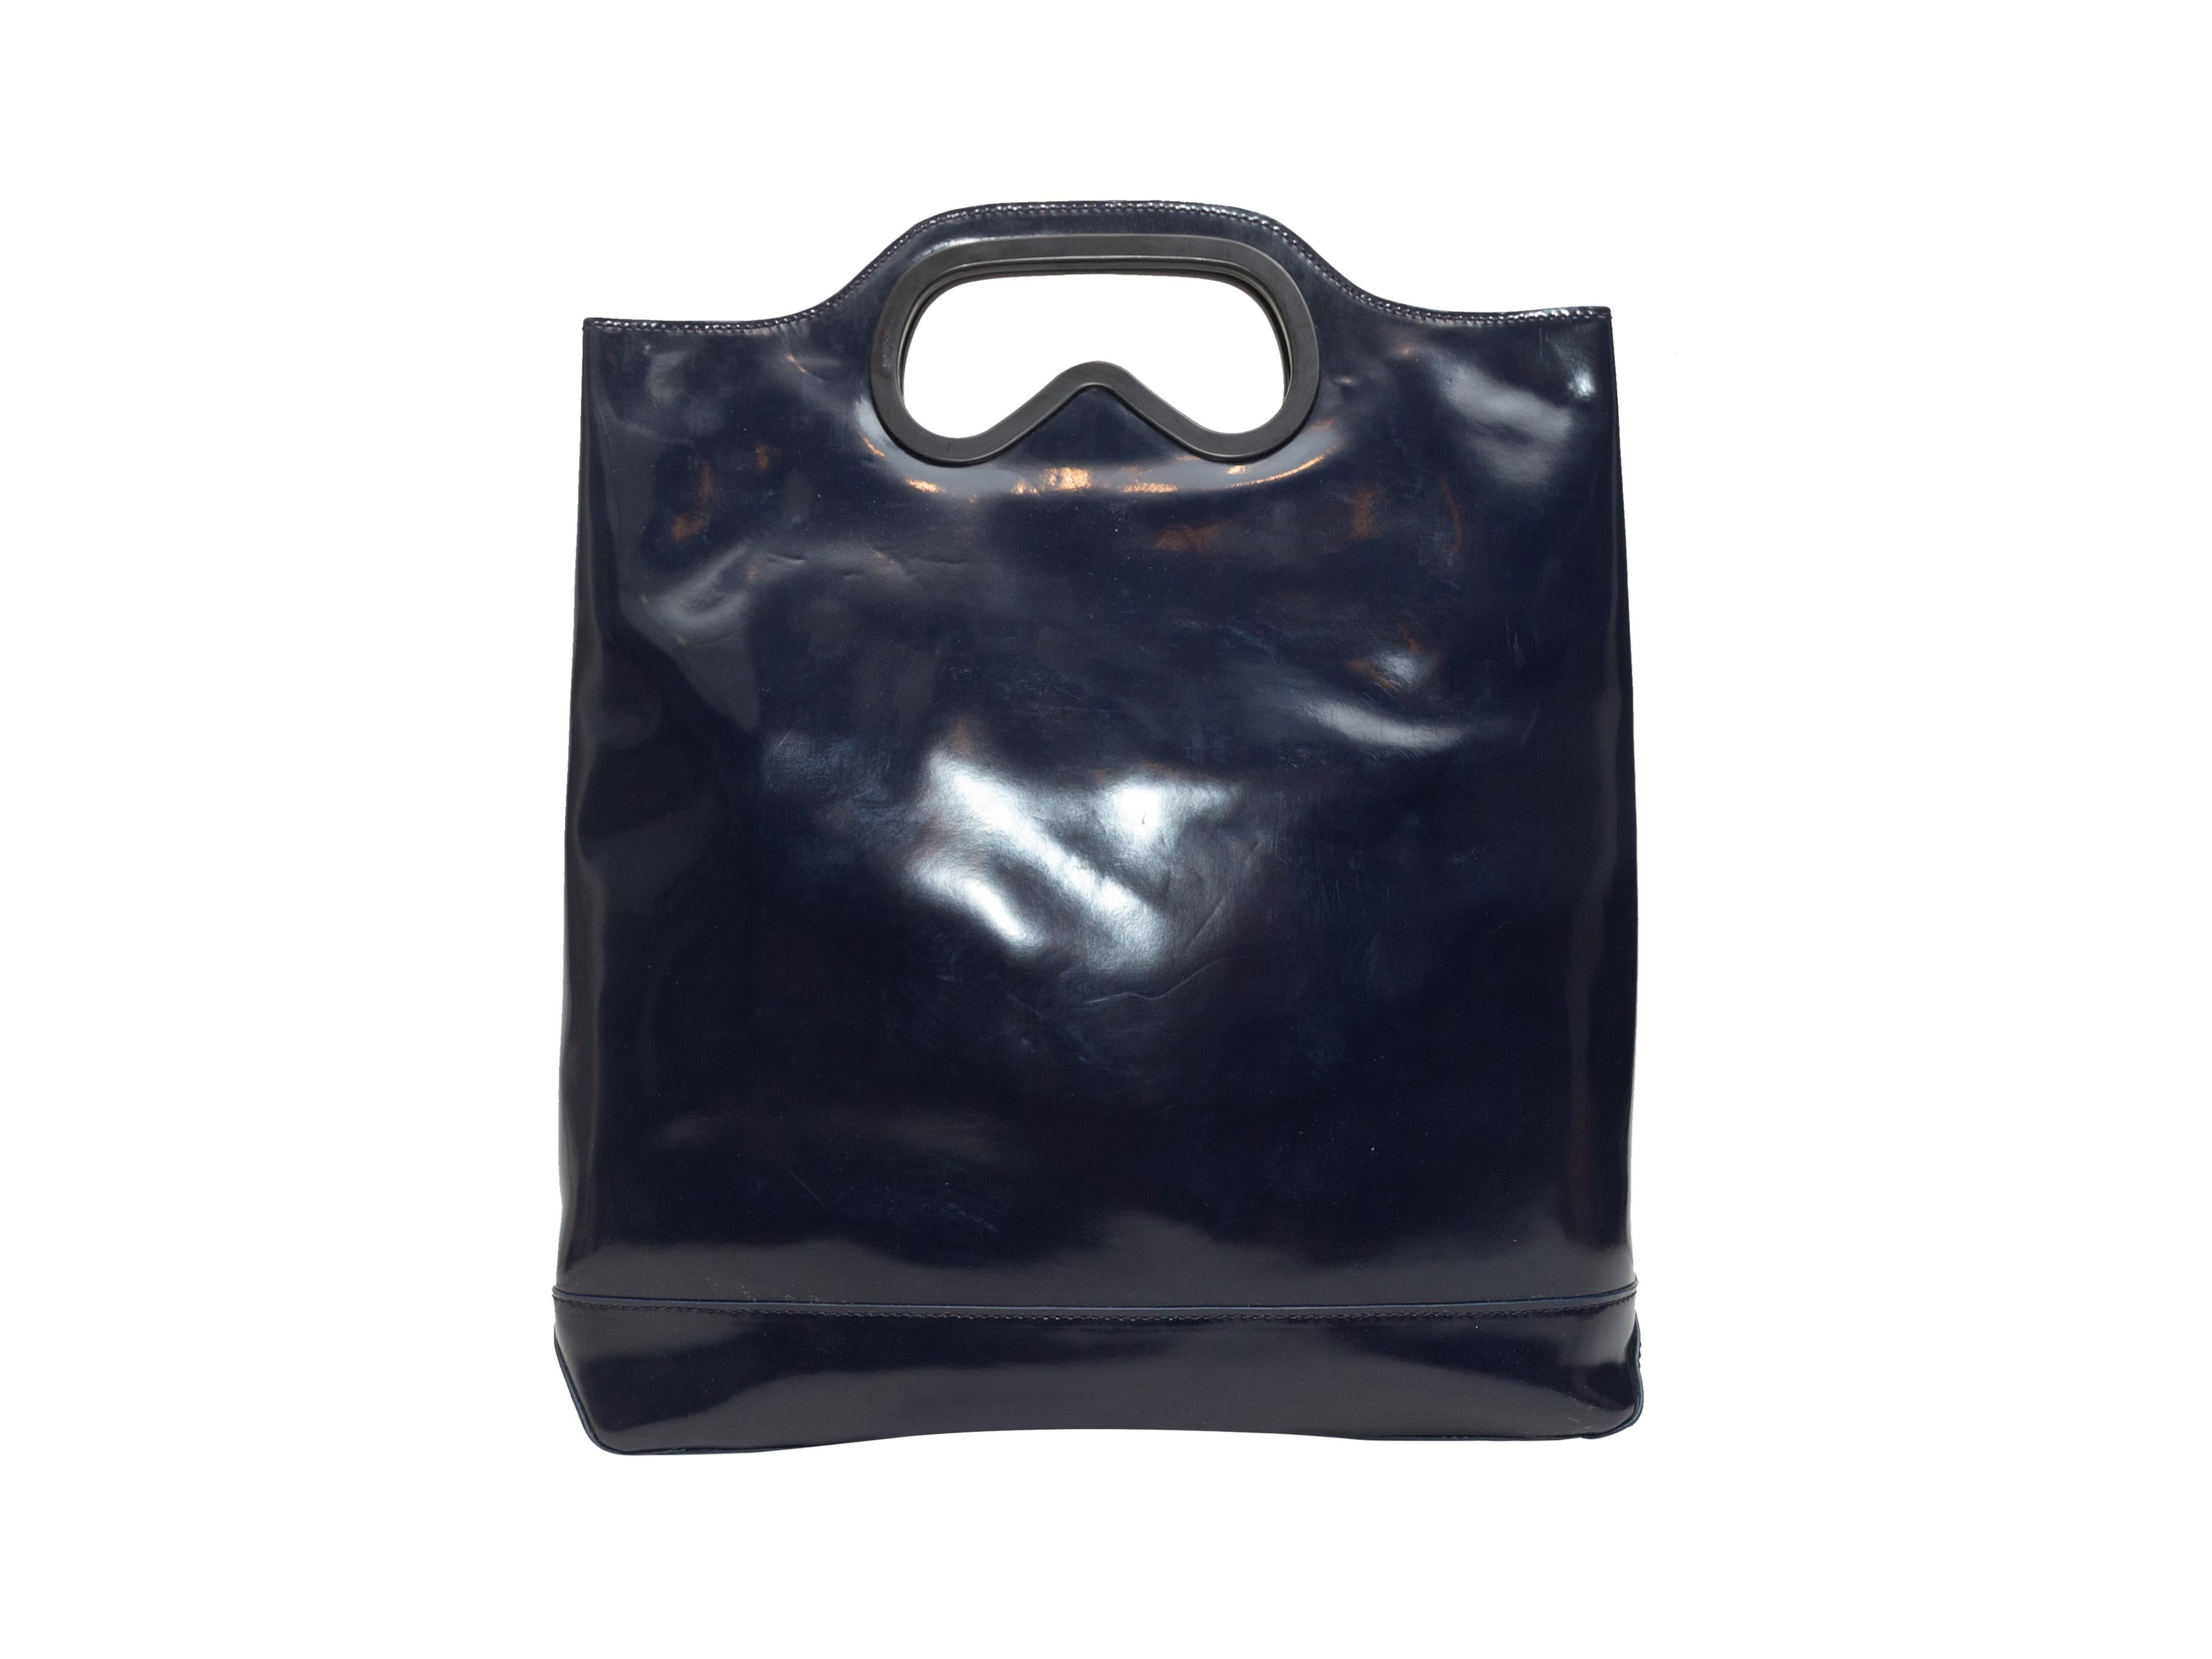 patent leather tote bags